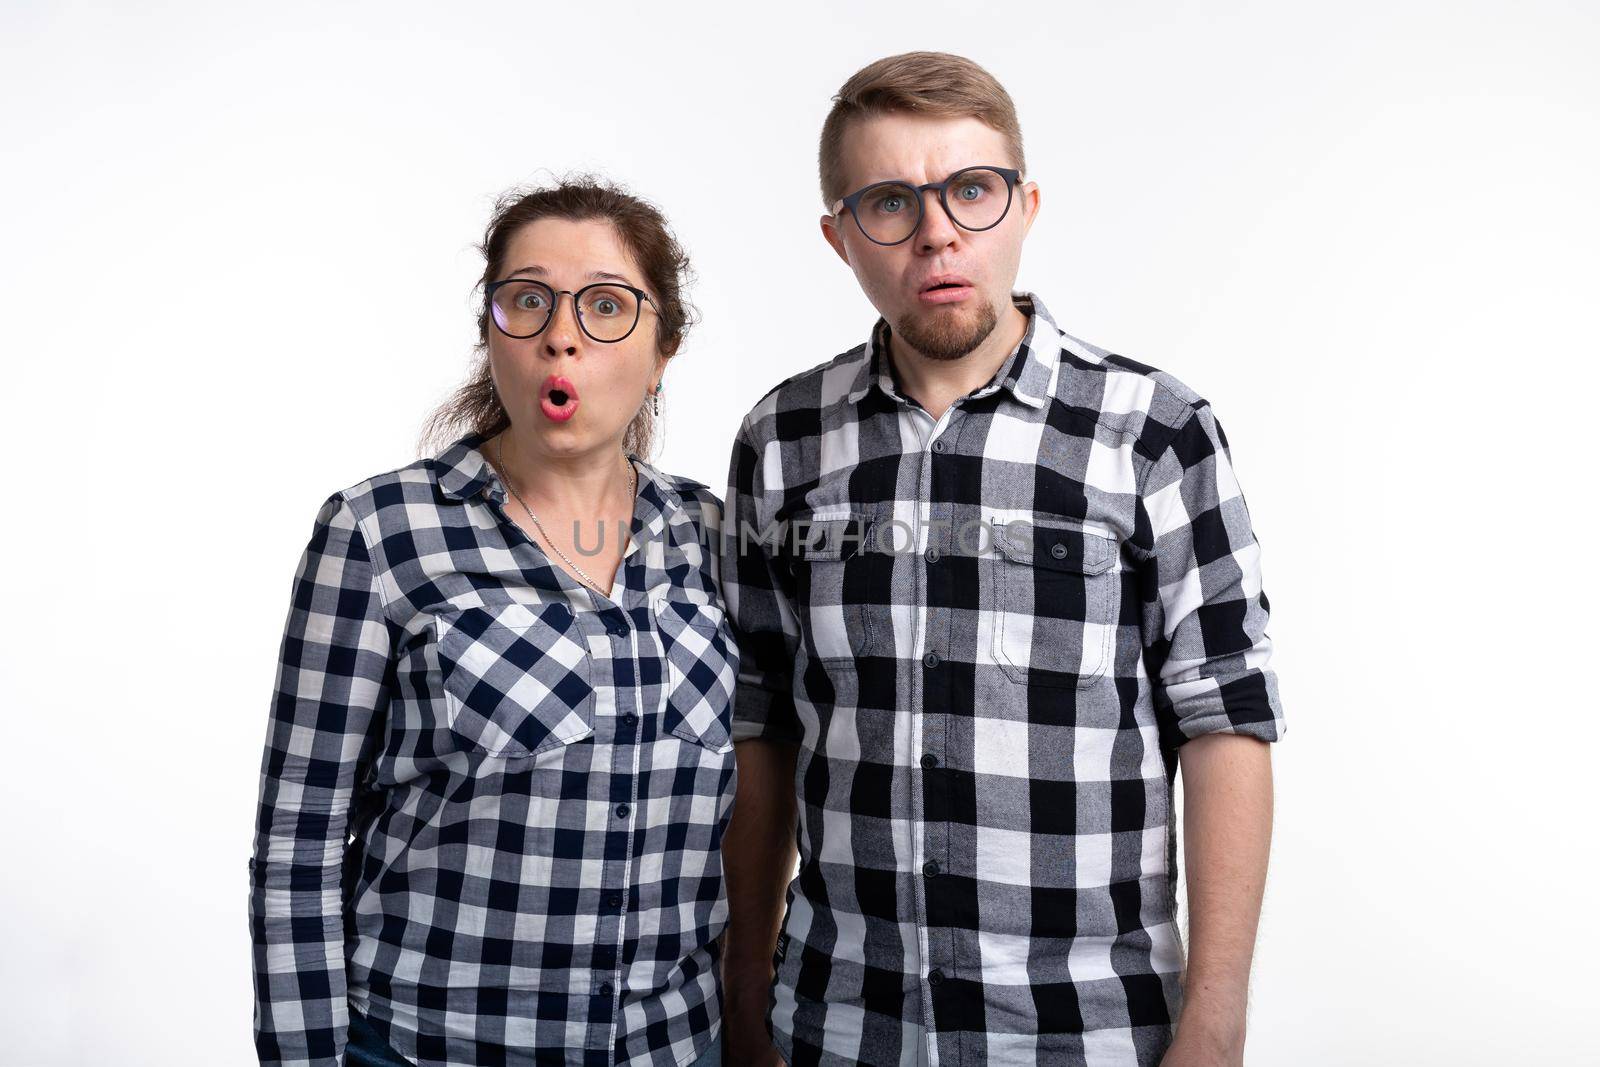 People and education concept - Two students with funny faces over white background.